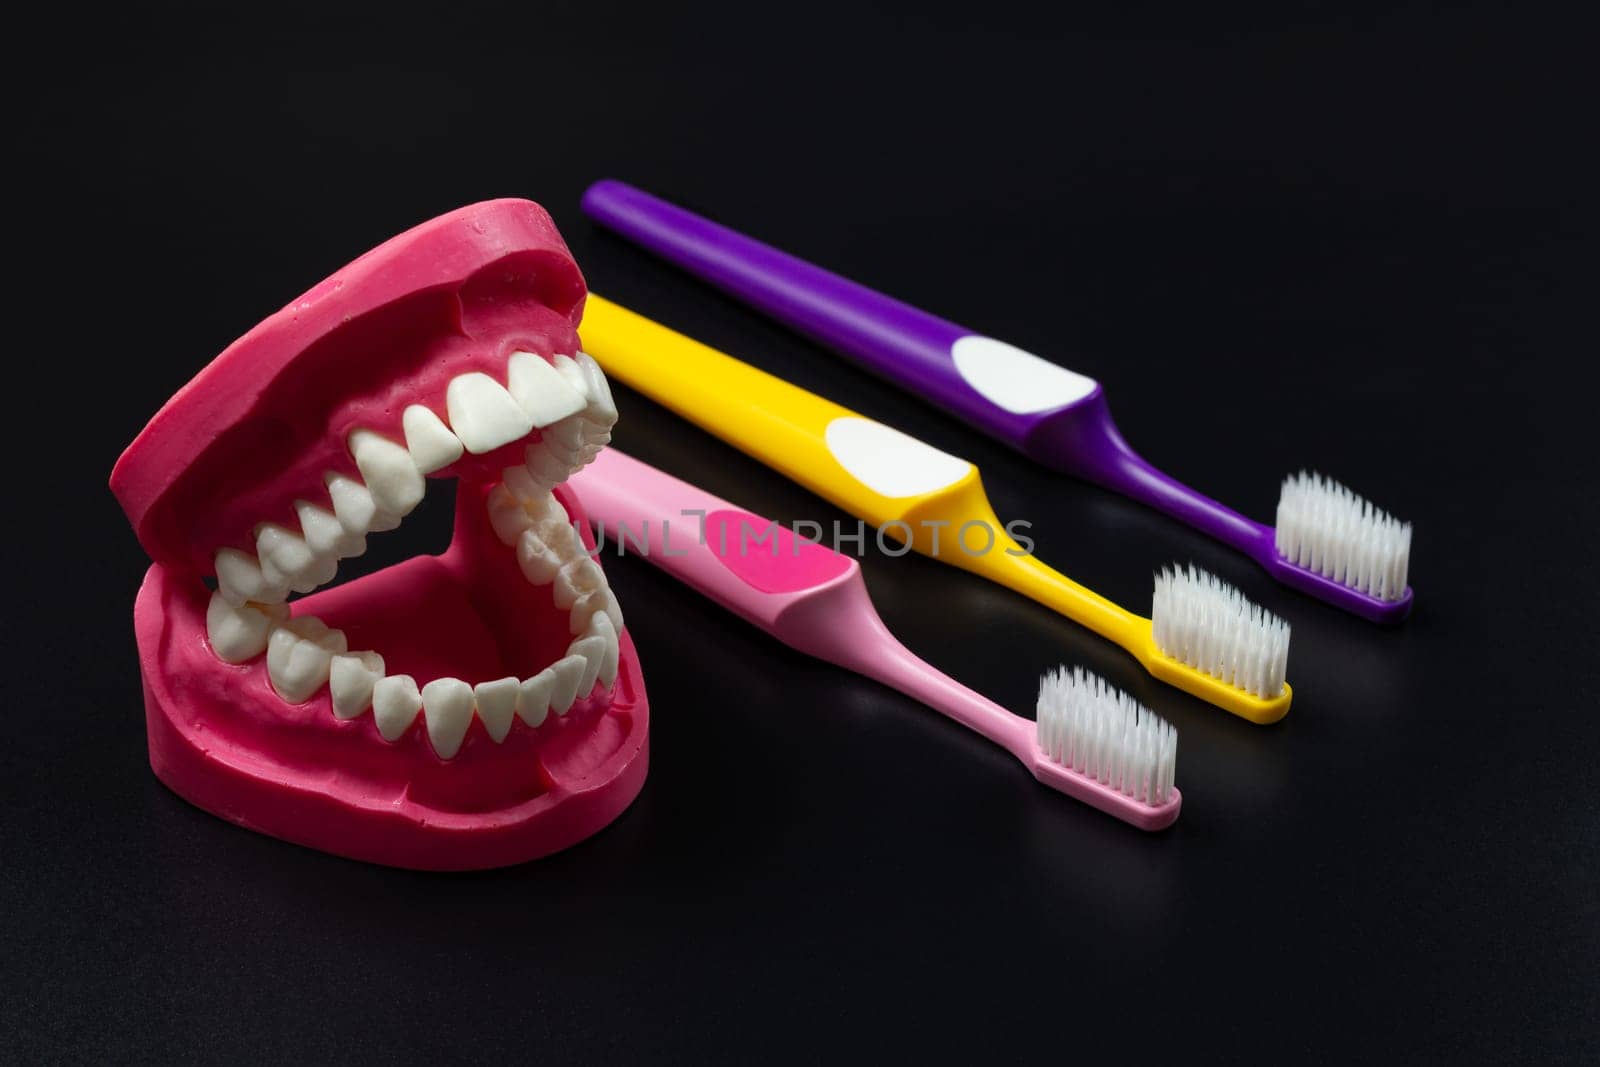 Human jaw layout and the toothbrushes on the black background.